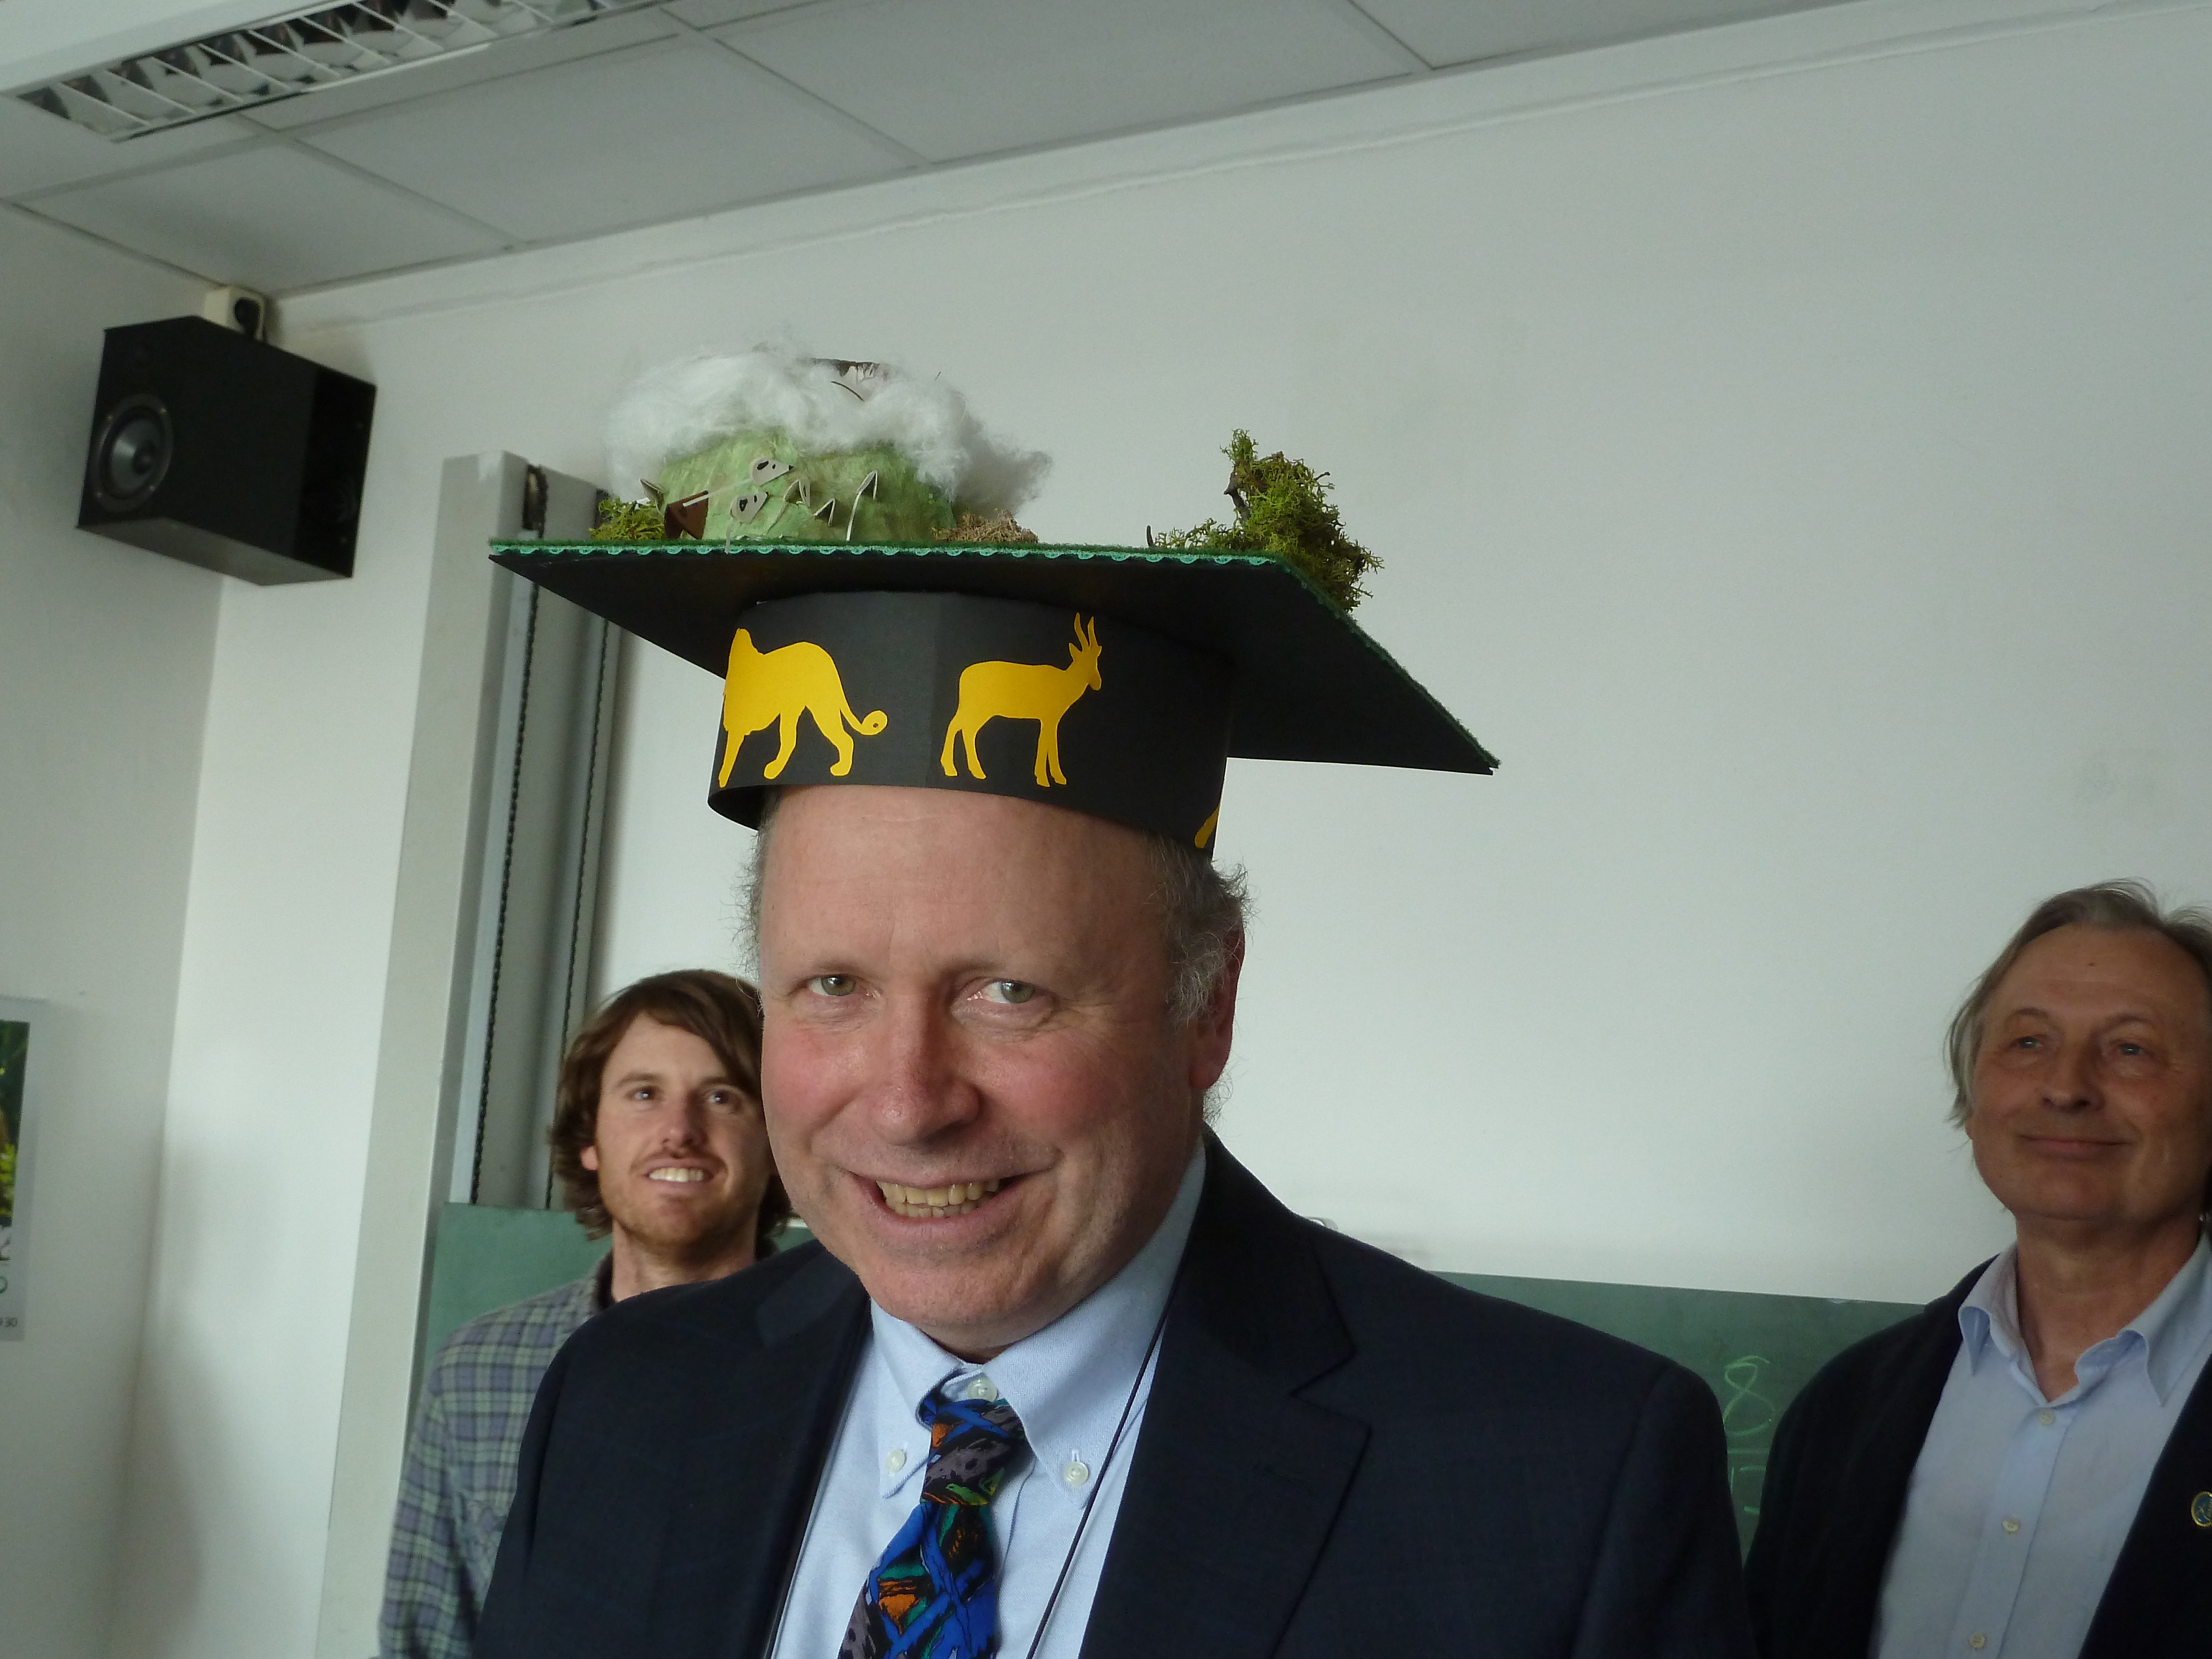 William Stanley, Ph.D., sports the unique mortarboard made for him by his colleagues to mark the awarding of his doctorate. Courtesy of Mary Anne Rogers.